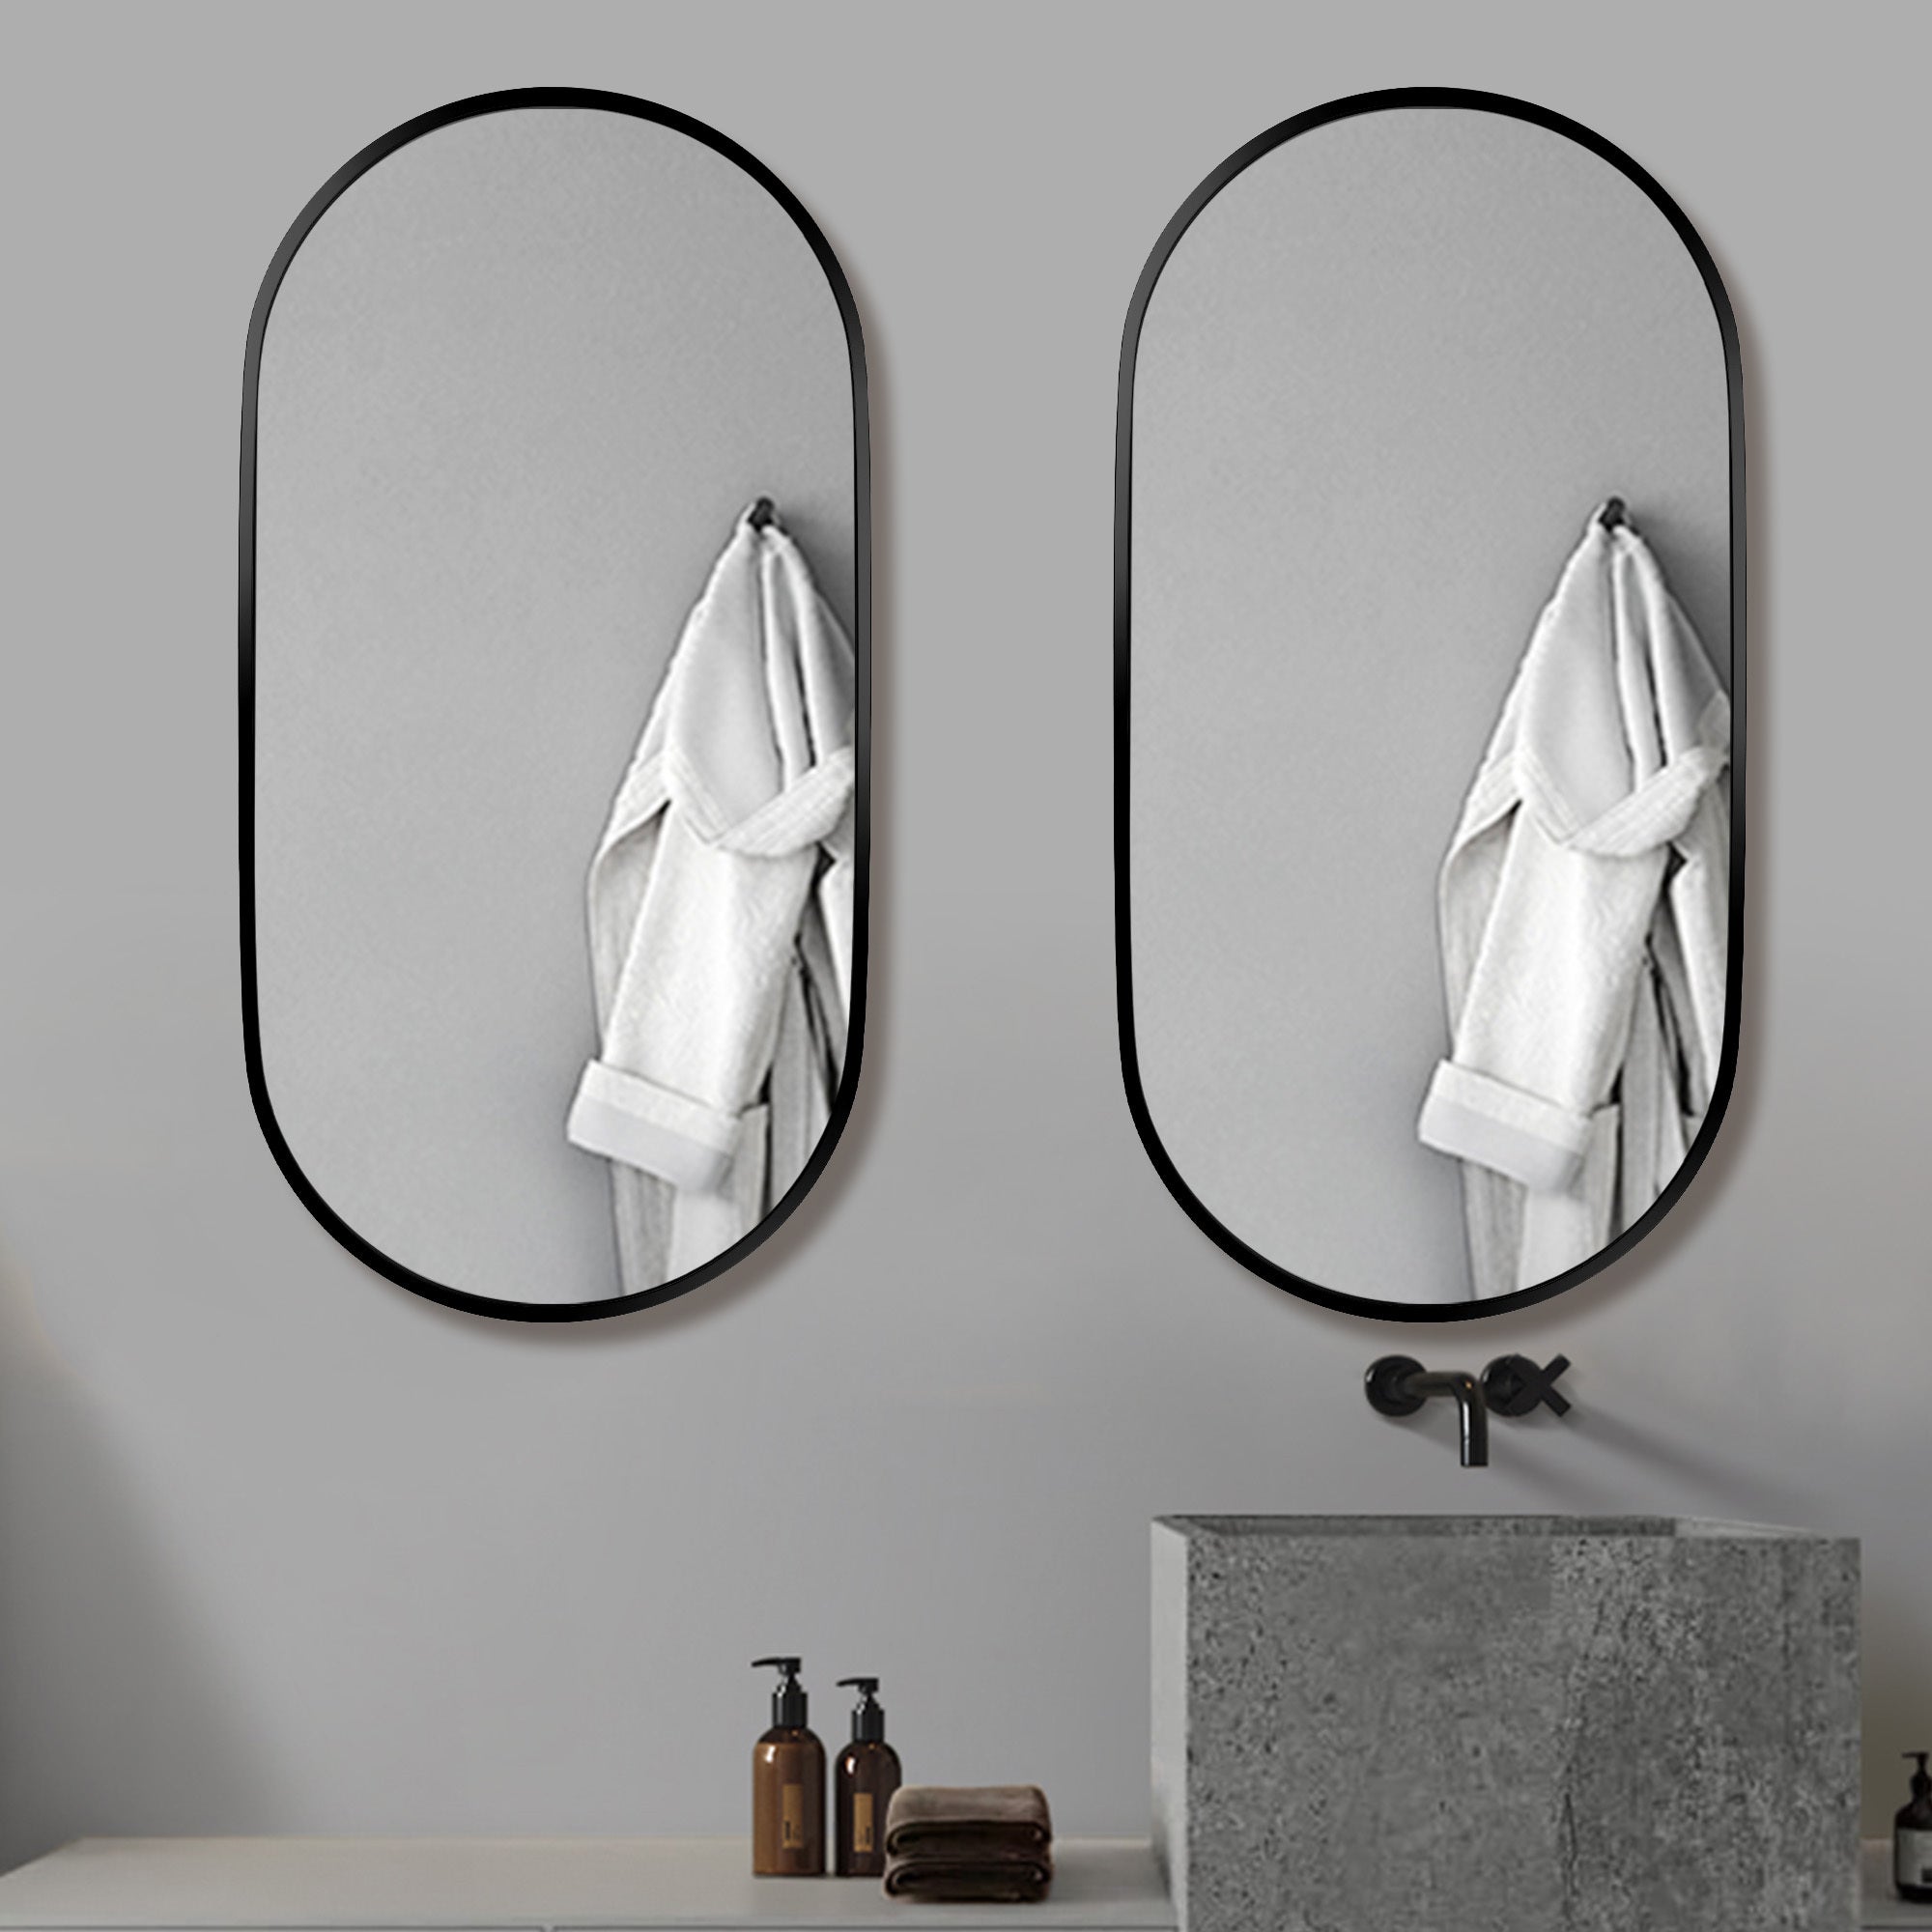 MAICOSY Oval Wall Mounted Mirror Black Metal Vanity Mirrors Hanging 36"x18"